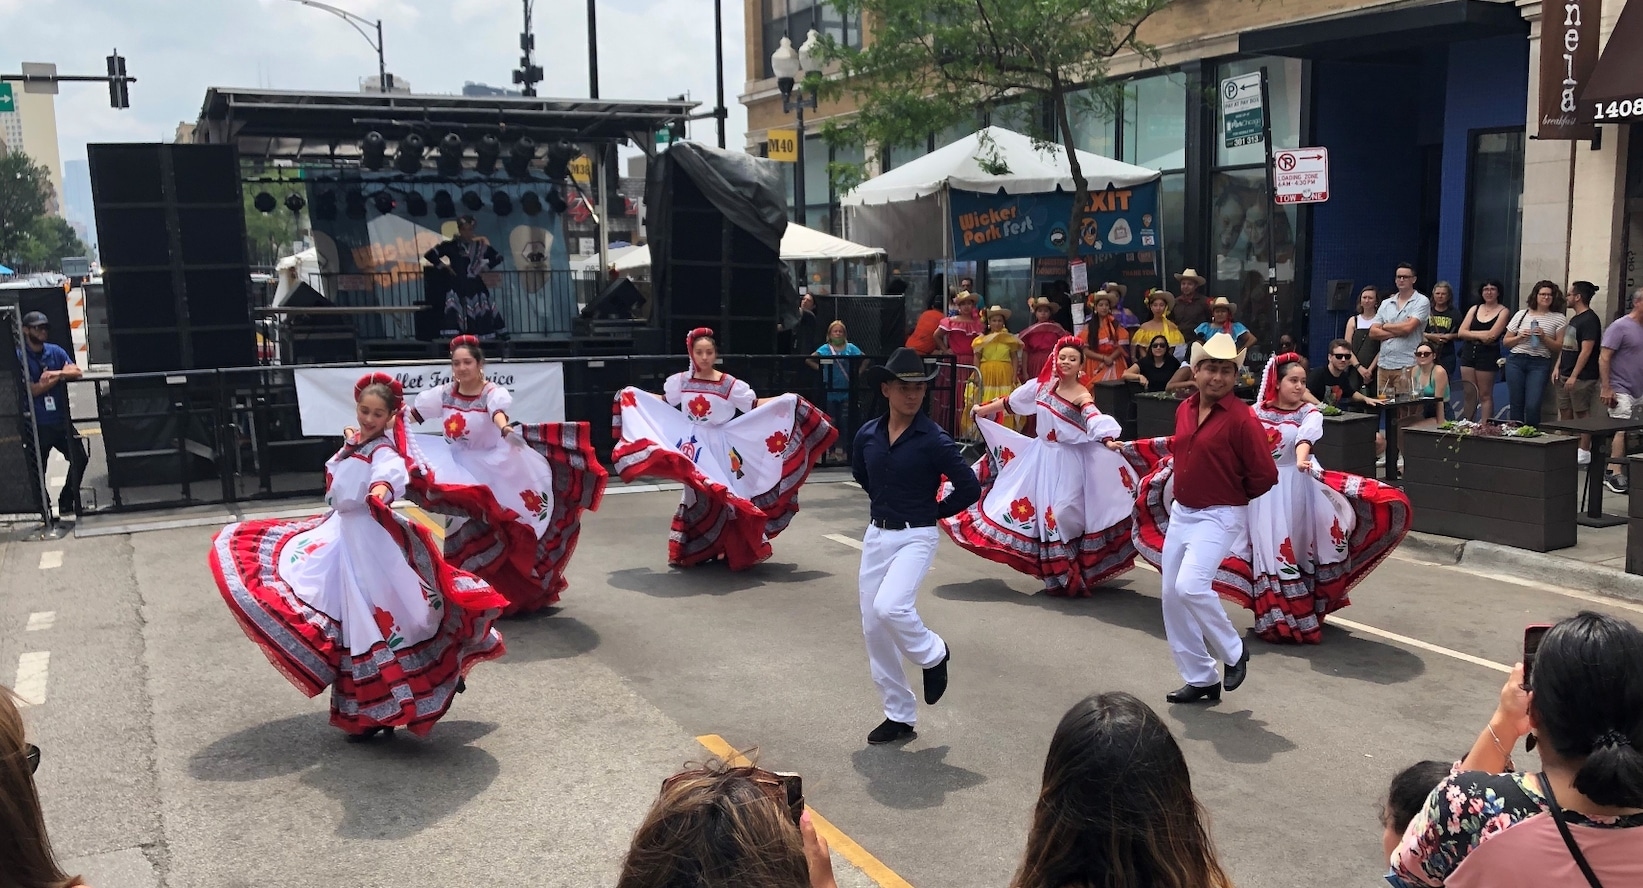 Dancers performing at Wicker Park Fest